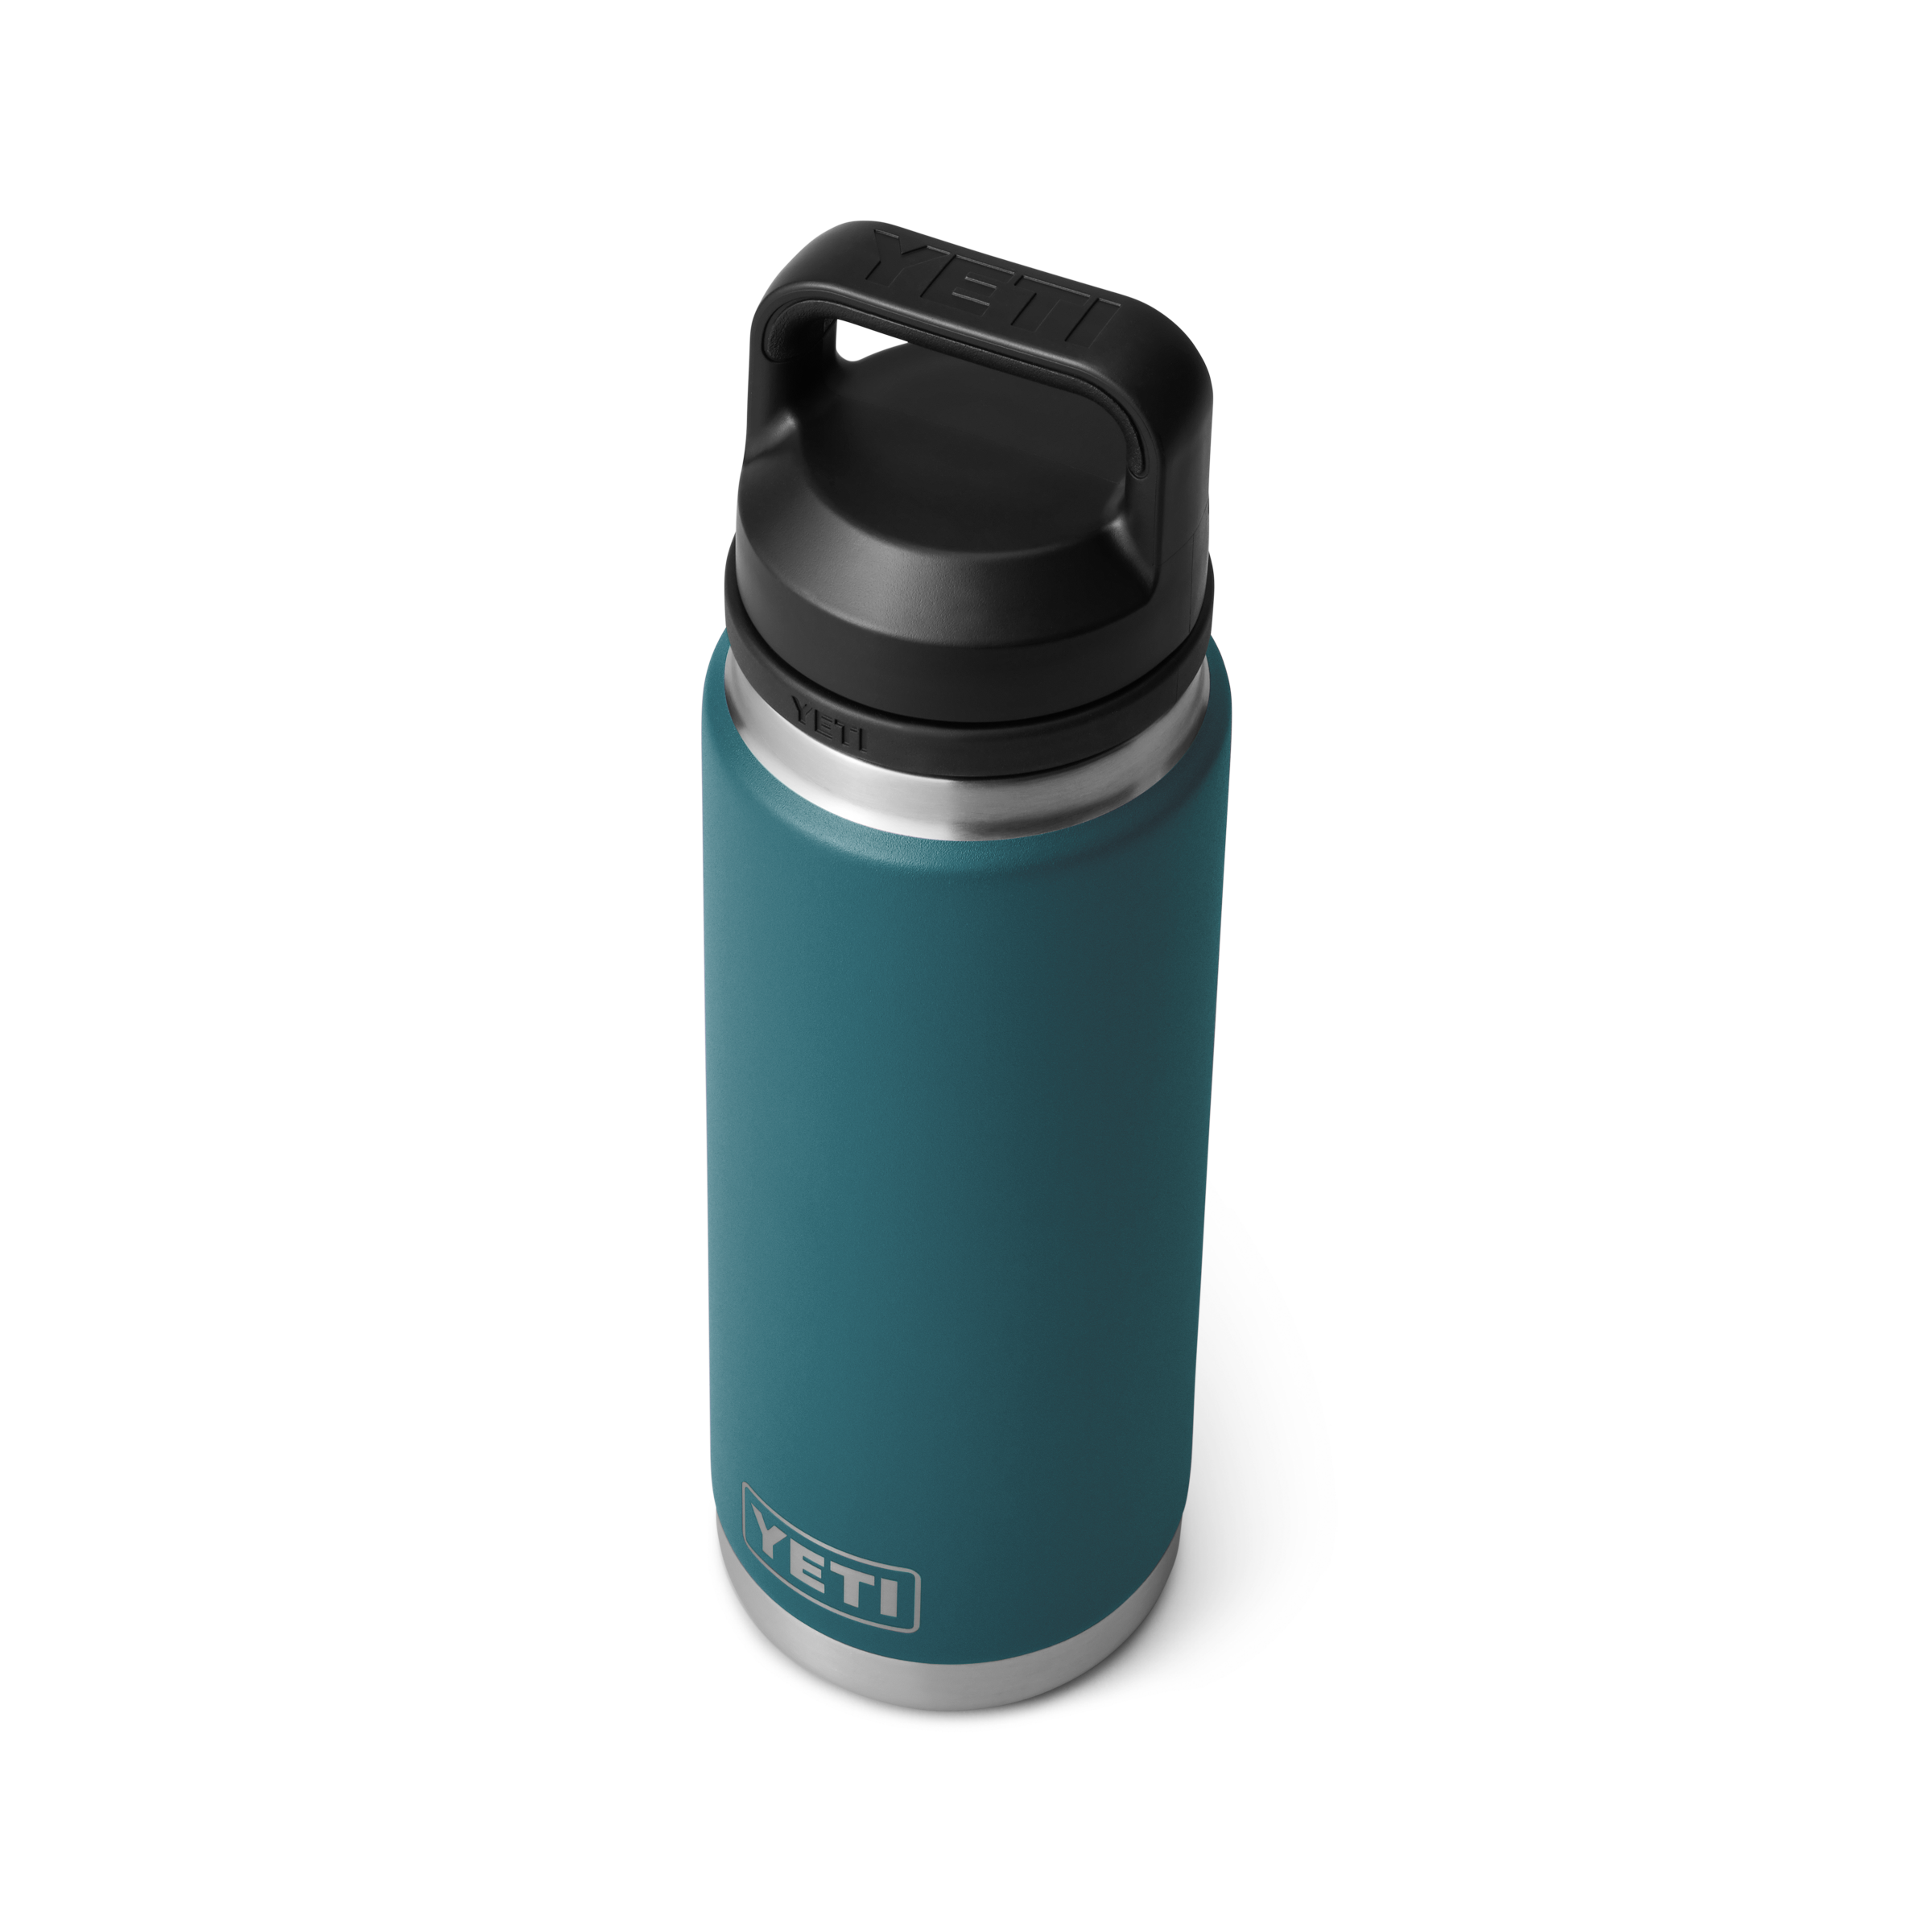 drink bottle, 100% leak proof, double wall vacuum insulation, easy to carry, keeps cool drinks cold, dishwasher safe, yeti